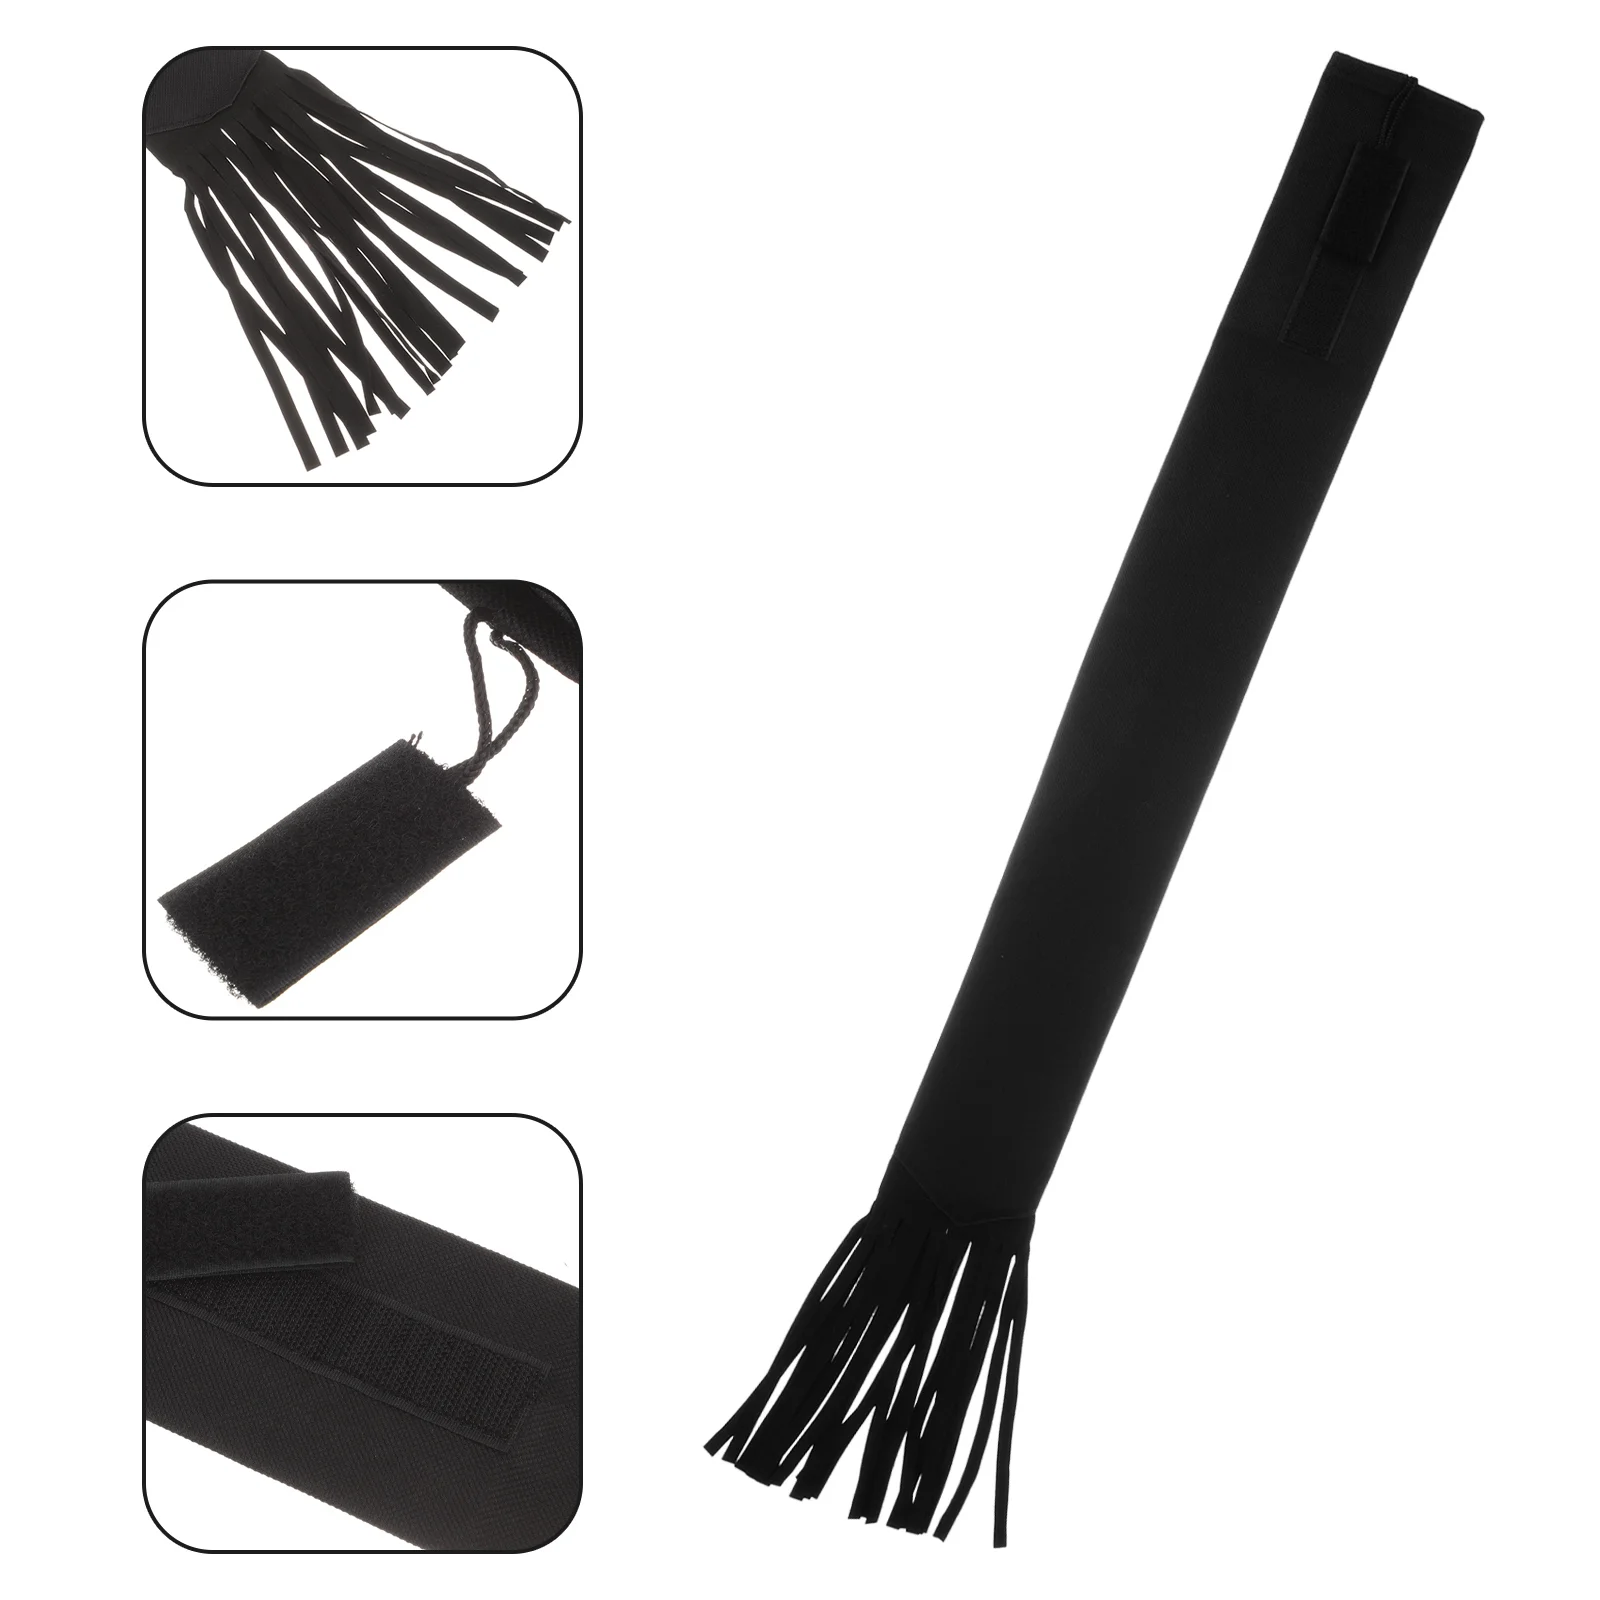 Horse Tail Decor Cattle Tails Bag Horse Tails Protector Horse Tail Cover Horse Tail Bag horse tail decor horse tail extension horse tail braided strap horse tail repelling horse tail extension